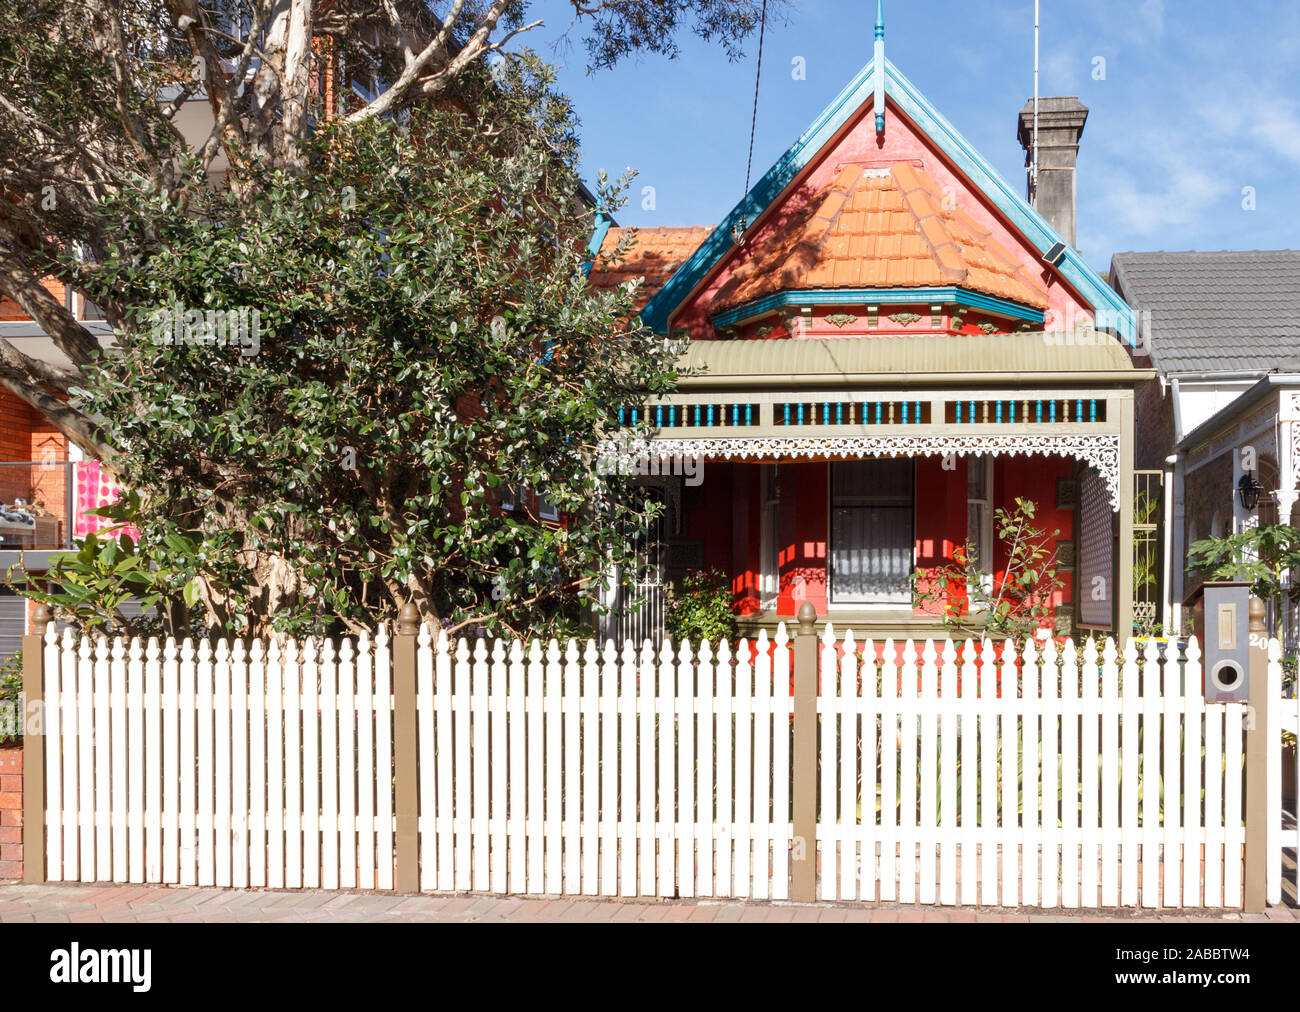 Manly, Australia - June 9th 2015: Typical federation style architecture house.  The town is a desirable suburb of Sydney. Stock Photo